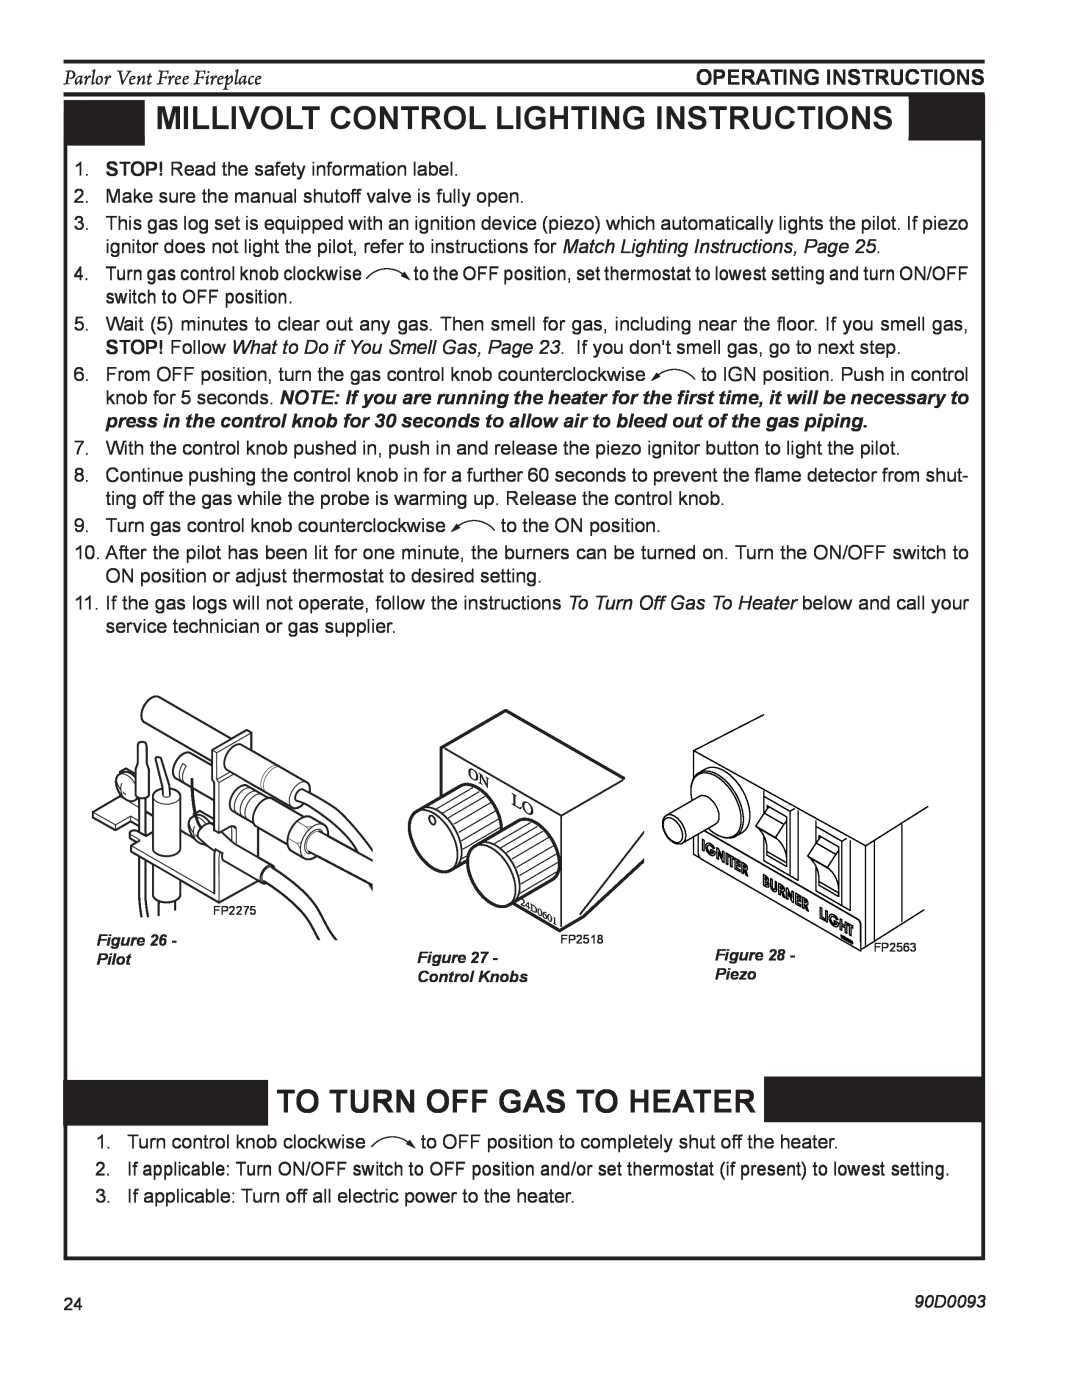 Monessen Hearth PL20 Millivolt control lighting instructions, To Turn Off Gas To Heater, Parlor Vent Free Fireplace 